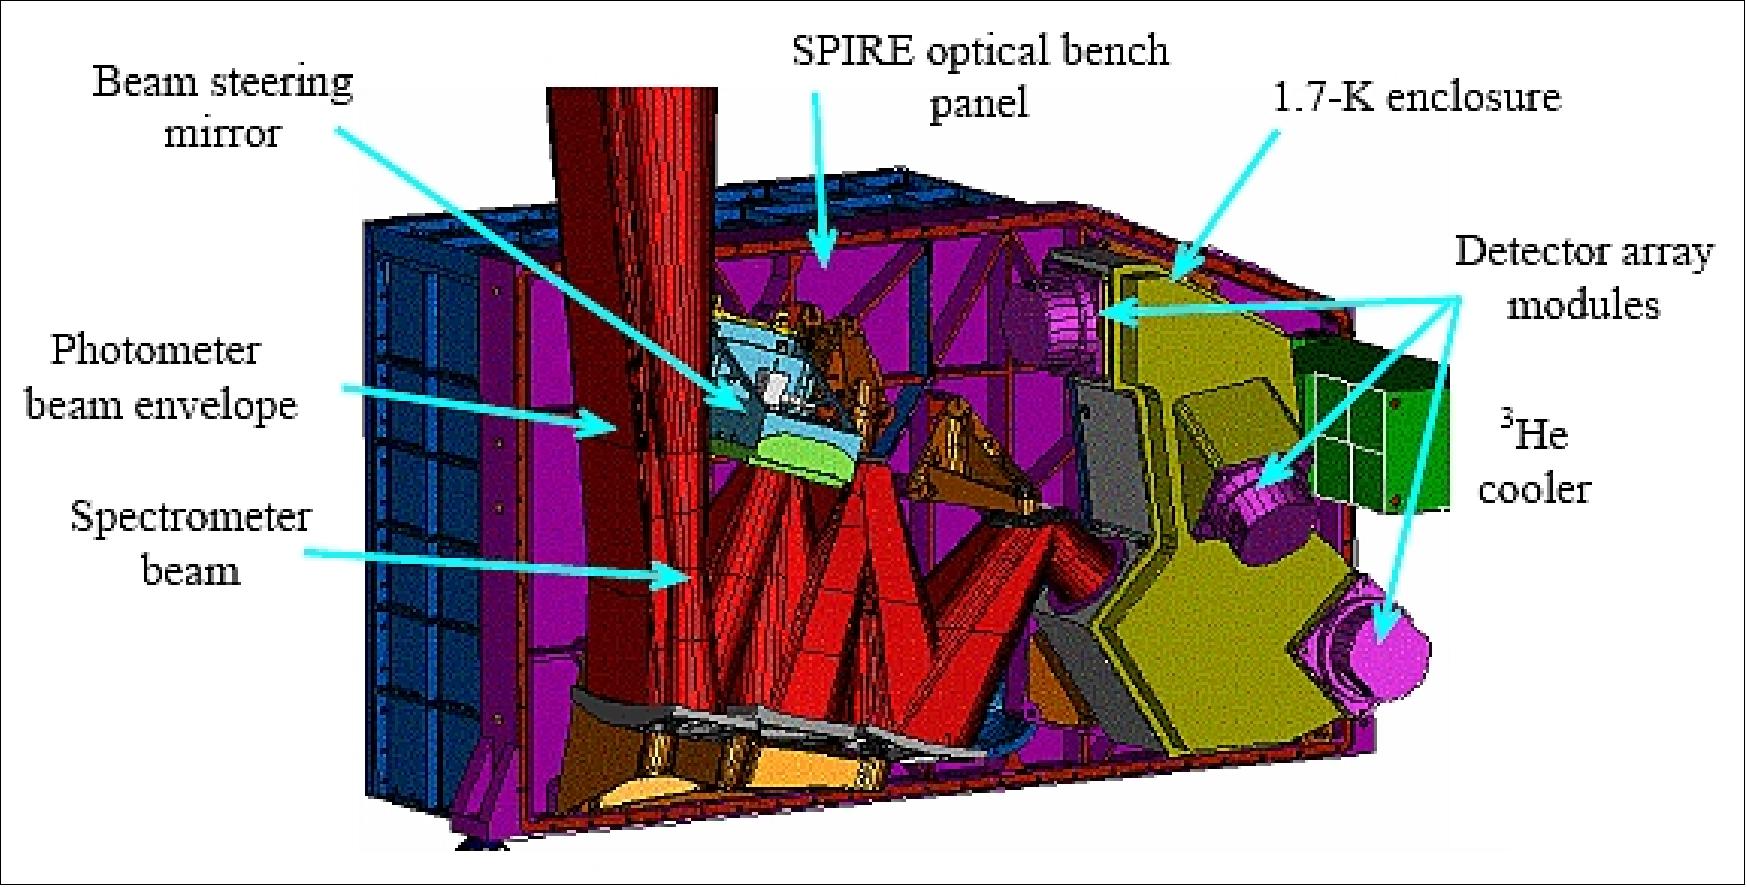 Figure 106: Schematic view of the SPIRE photometer layout (SPIRE consortium)